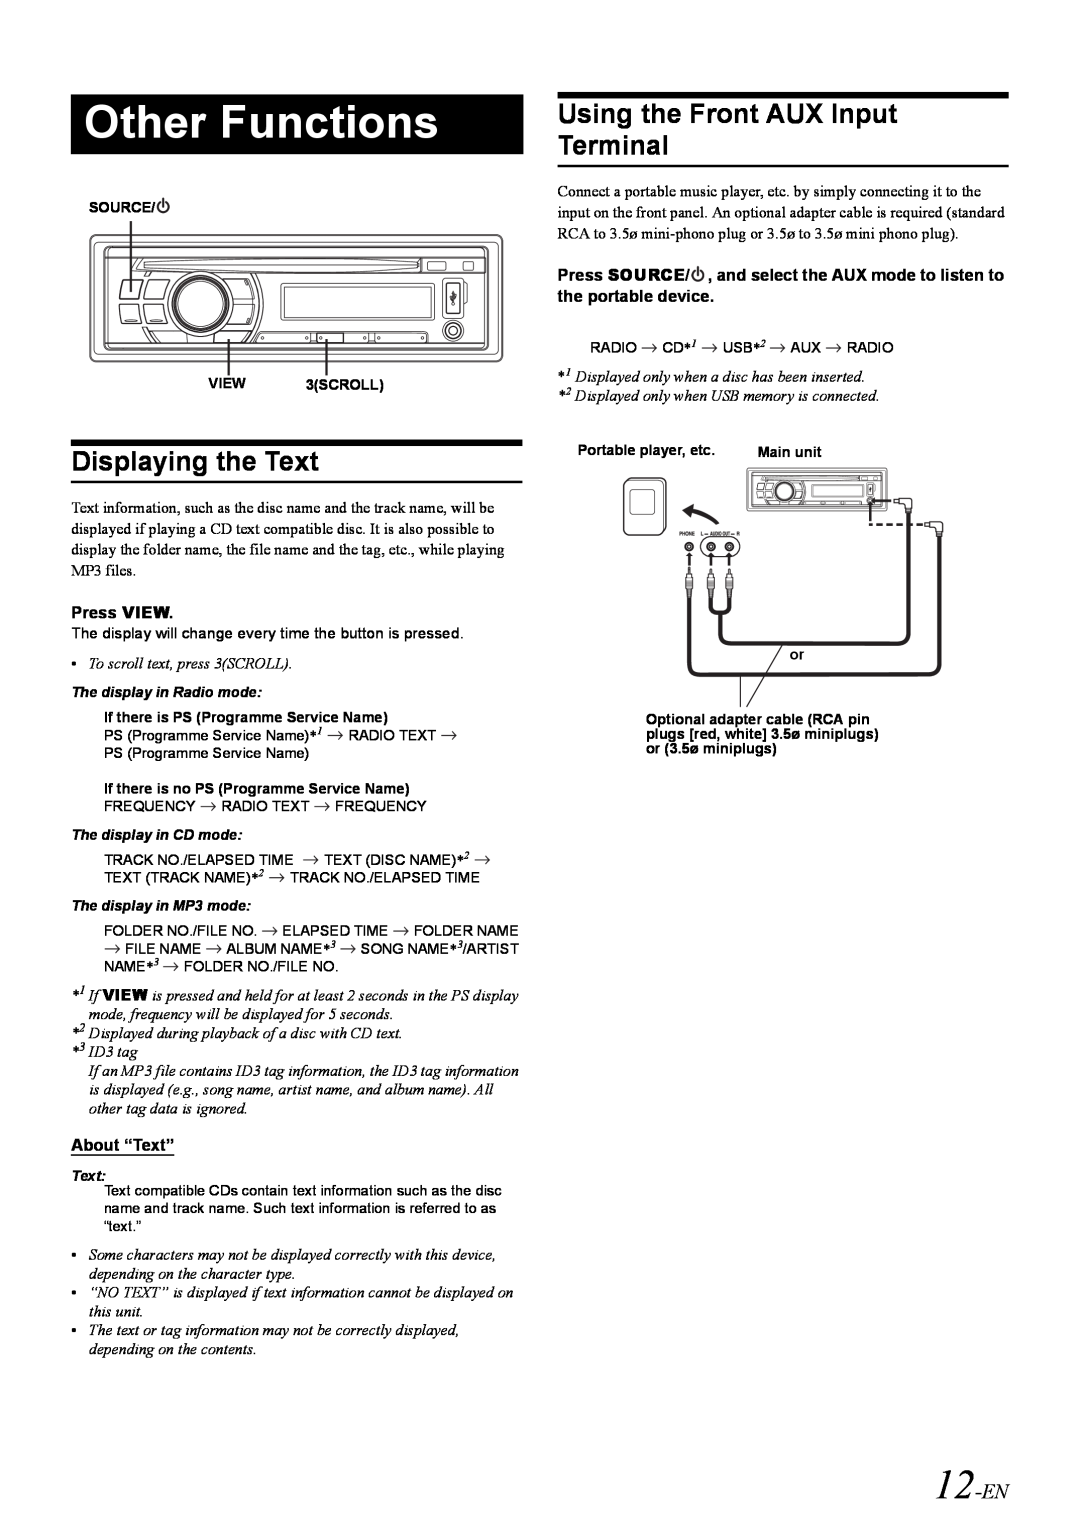 Alpine CDE-130RR, CDE-130RM owner manual Other Functions, Displaying the Text, Using the Front AUX Input Terminal, 12-EN 